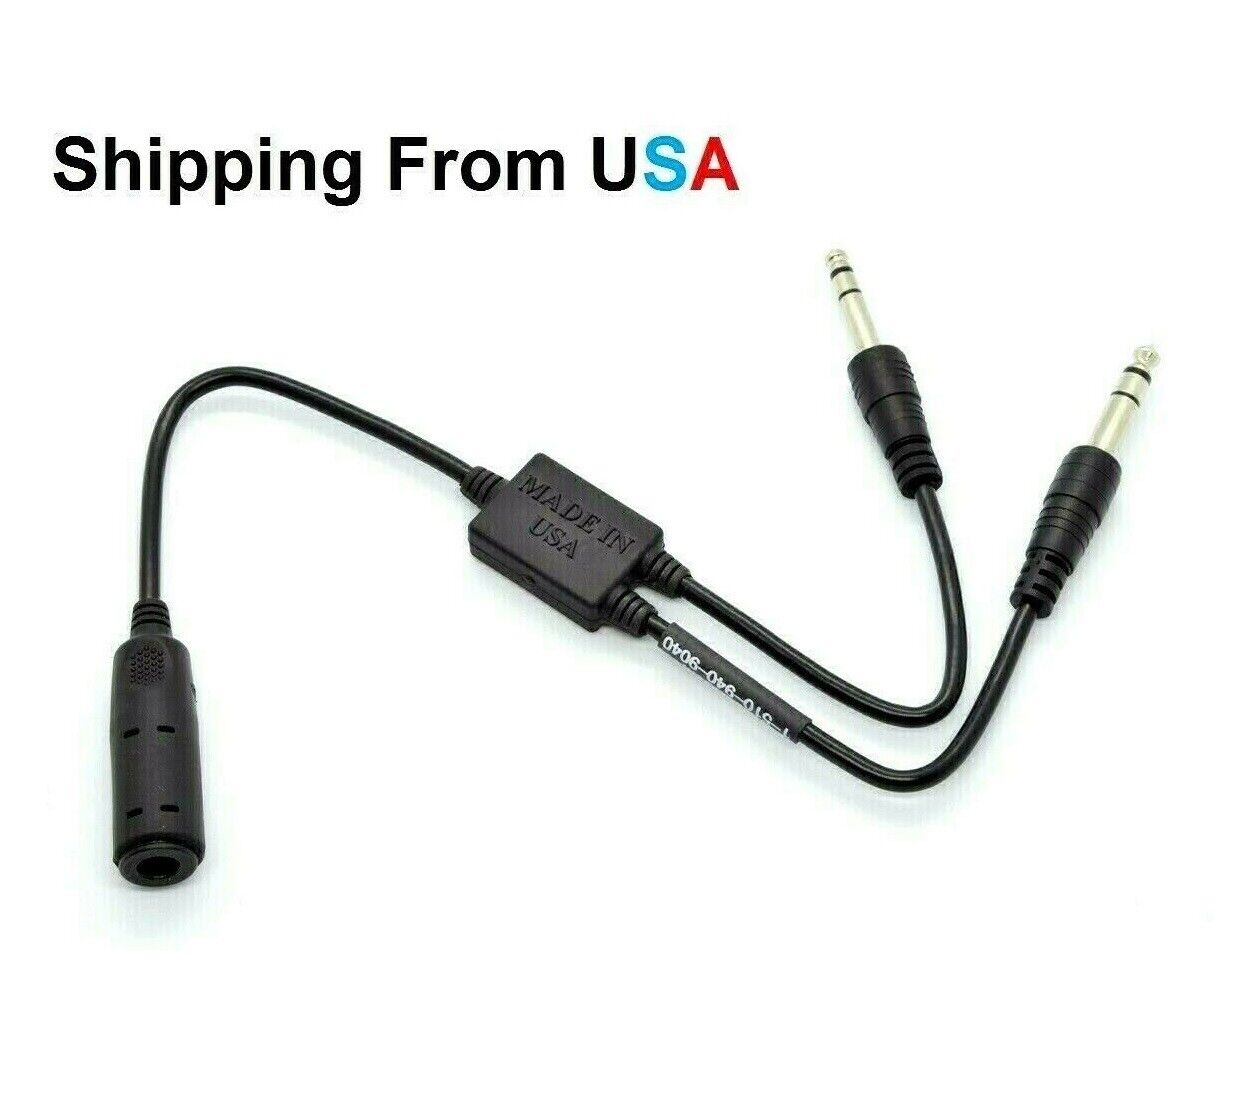 Low to High Impedance Headset Converter, Military Headset To General Aviation